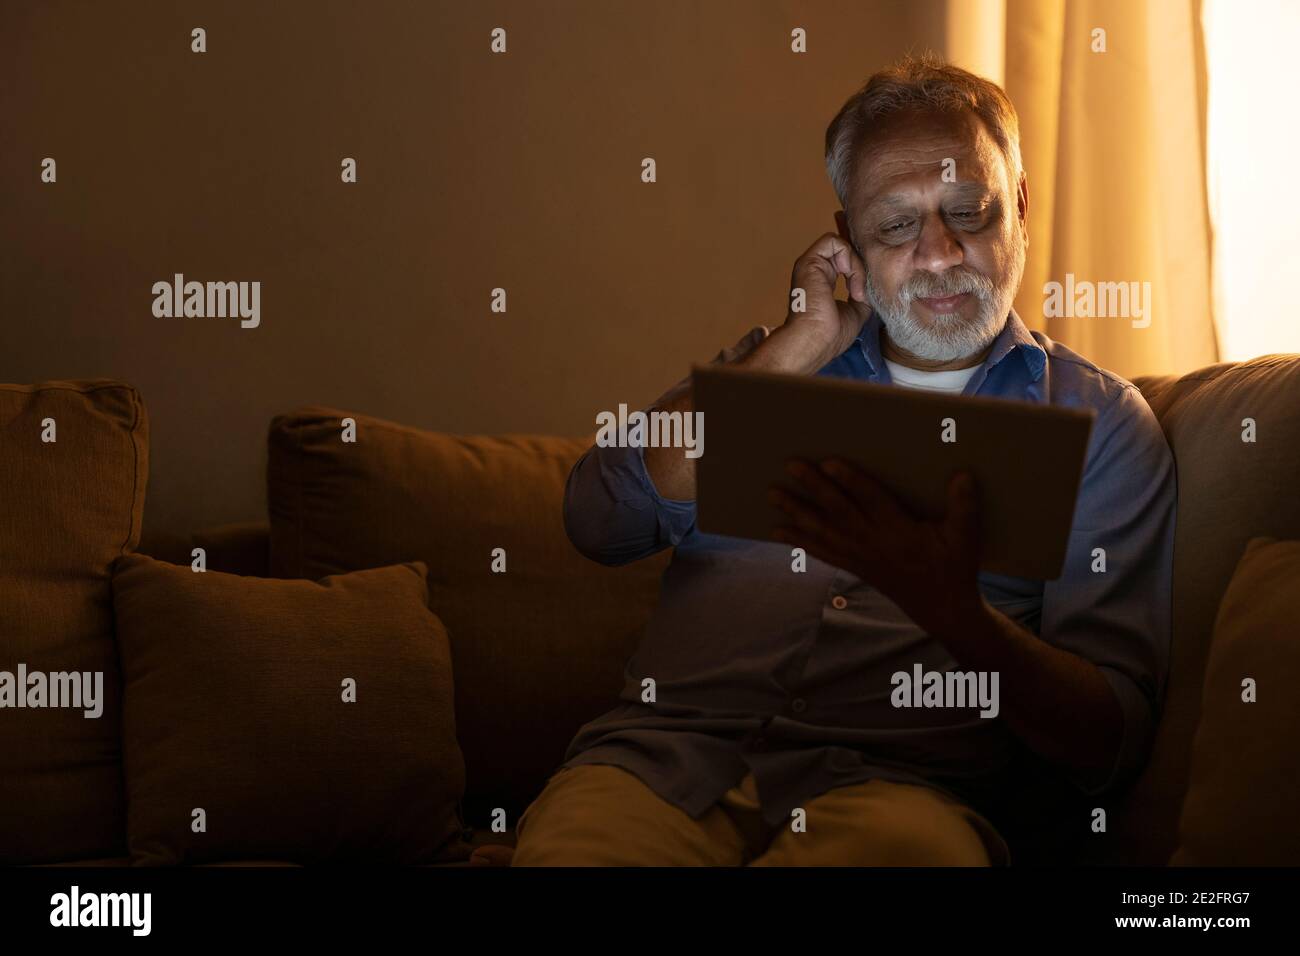 A SENIOR ADULT MAN SITTING AND USING DIGITAL TABLET Stock Photo